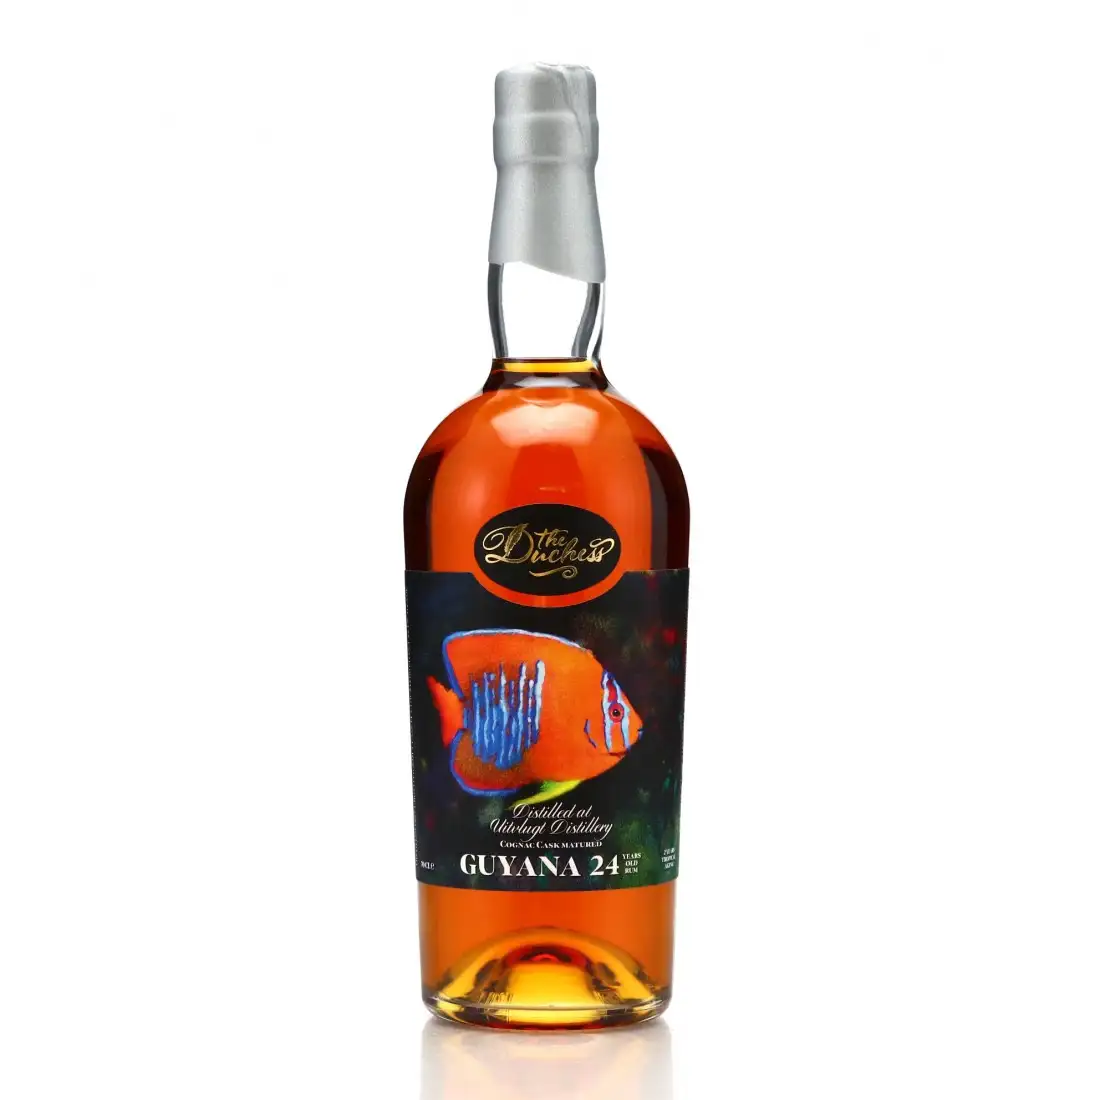 Image of the front of the bottle of the rum Guyana 24